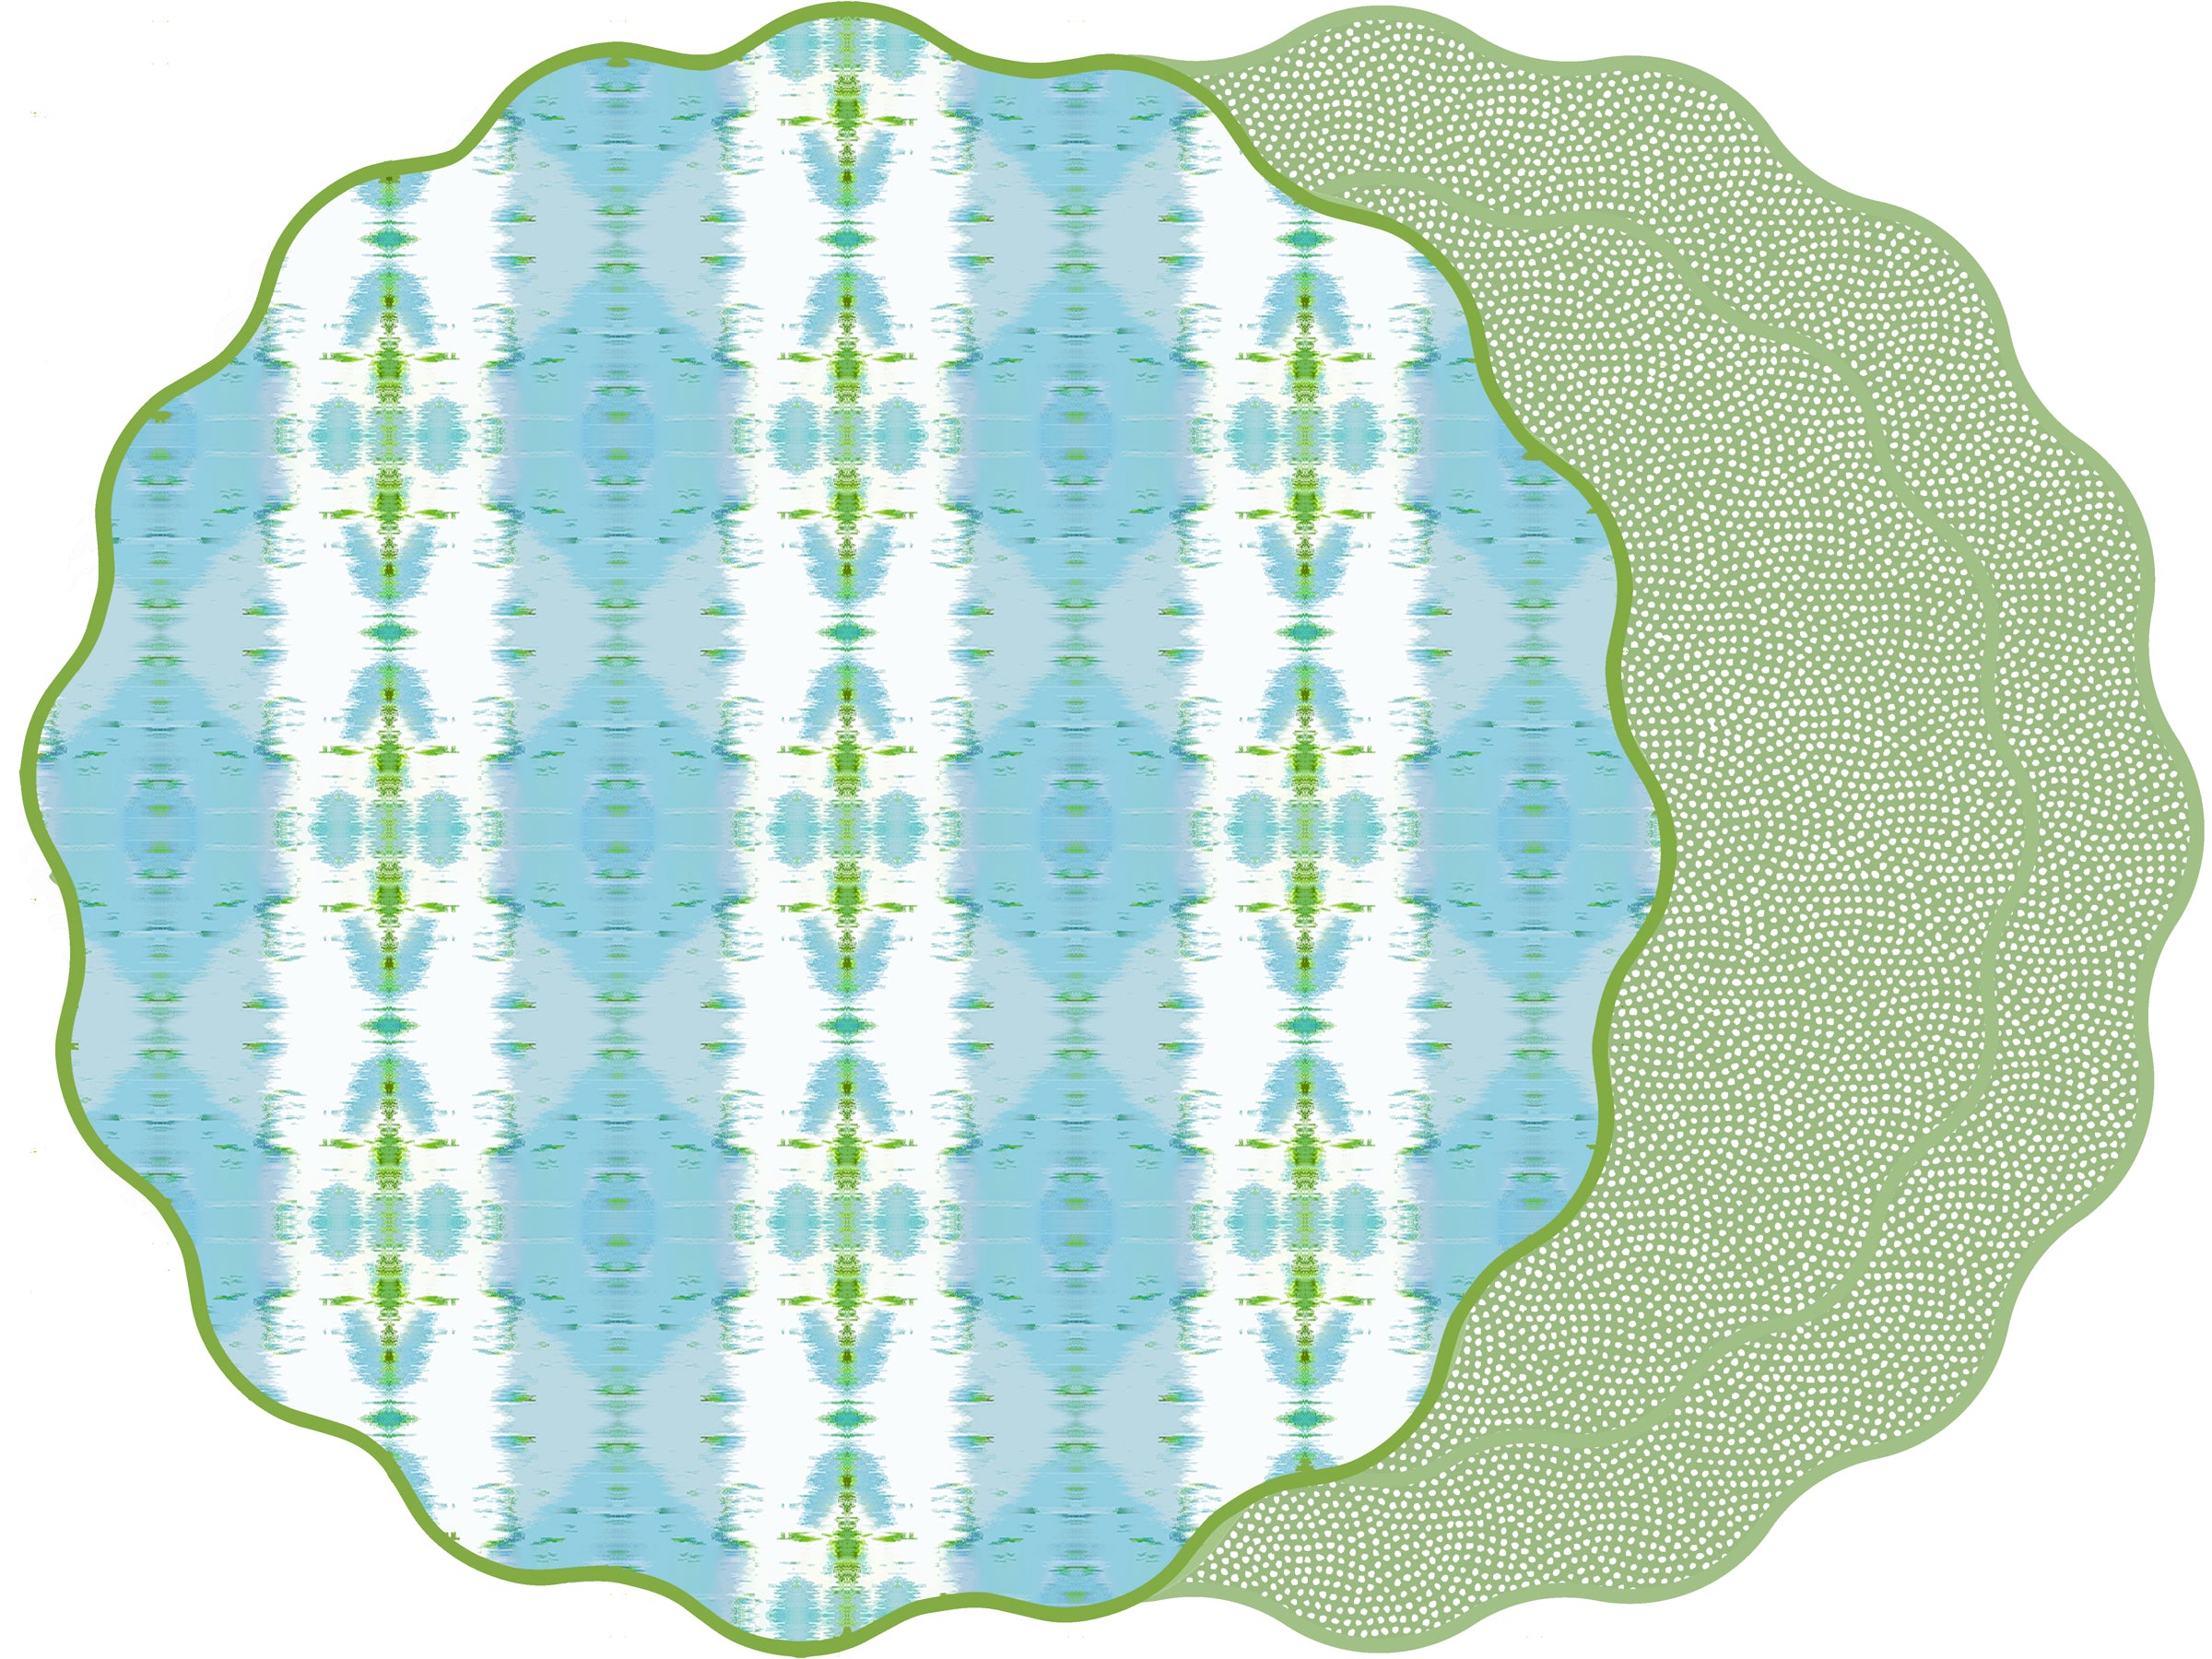 TWO SIDED SCALLOP LAURA PARK BLUE PASSION AND SAXON GREEN DOT FAN PLACEMAT